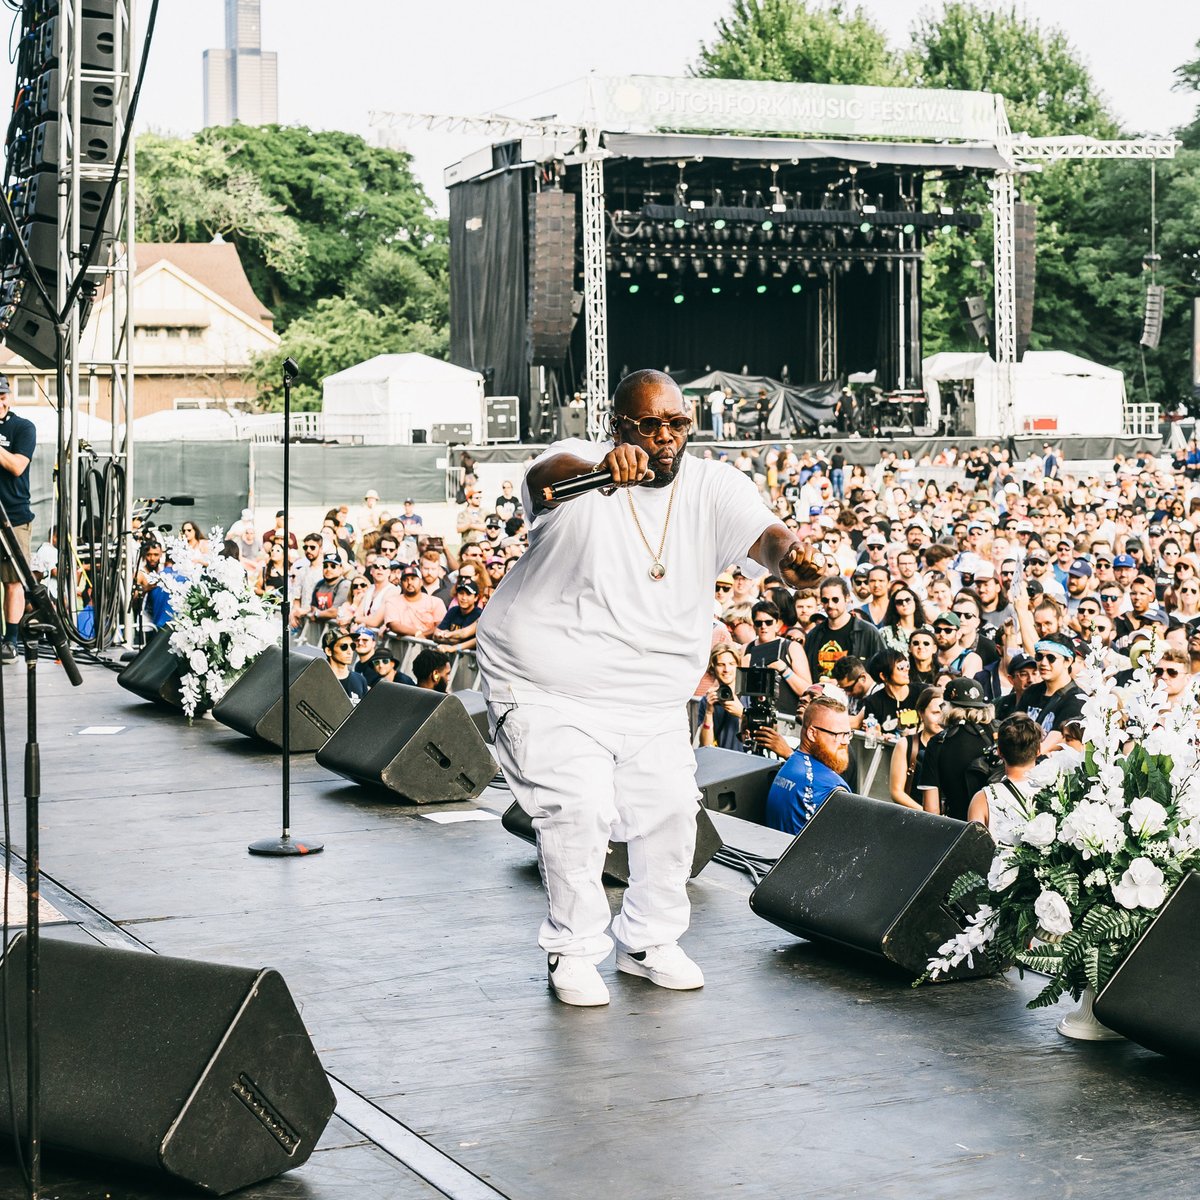 Can't wait to get down like @killermike at this year's #P4kFest 🔥